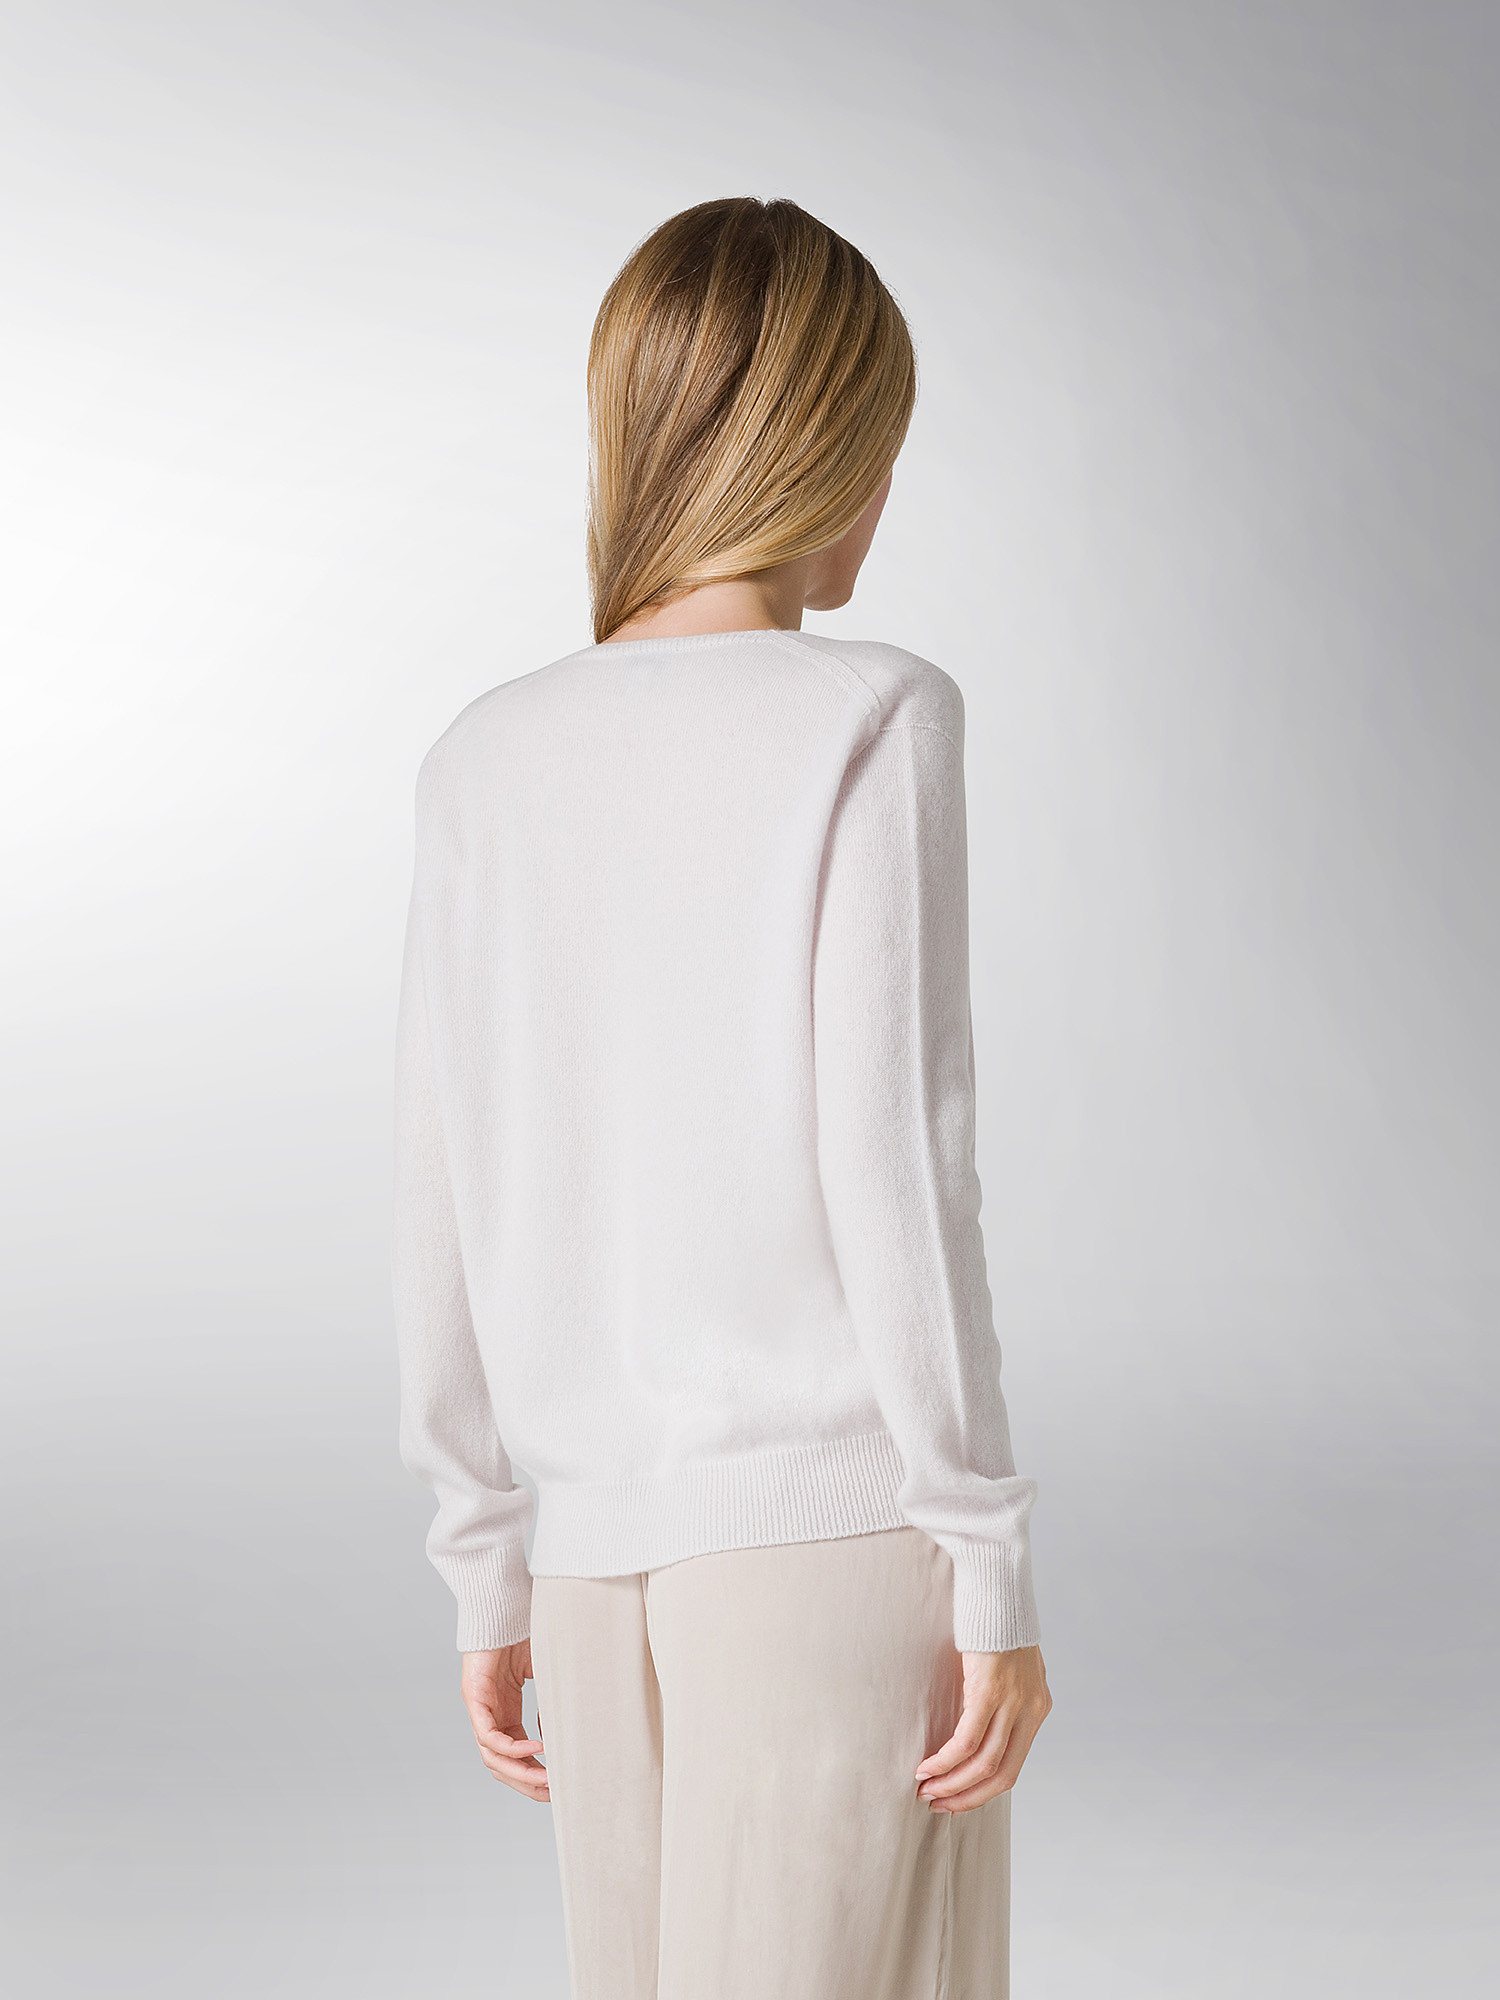 Coin Cashmere - V-neck sweater in pure premium cashmere, White, large image number 2